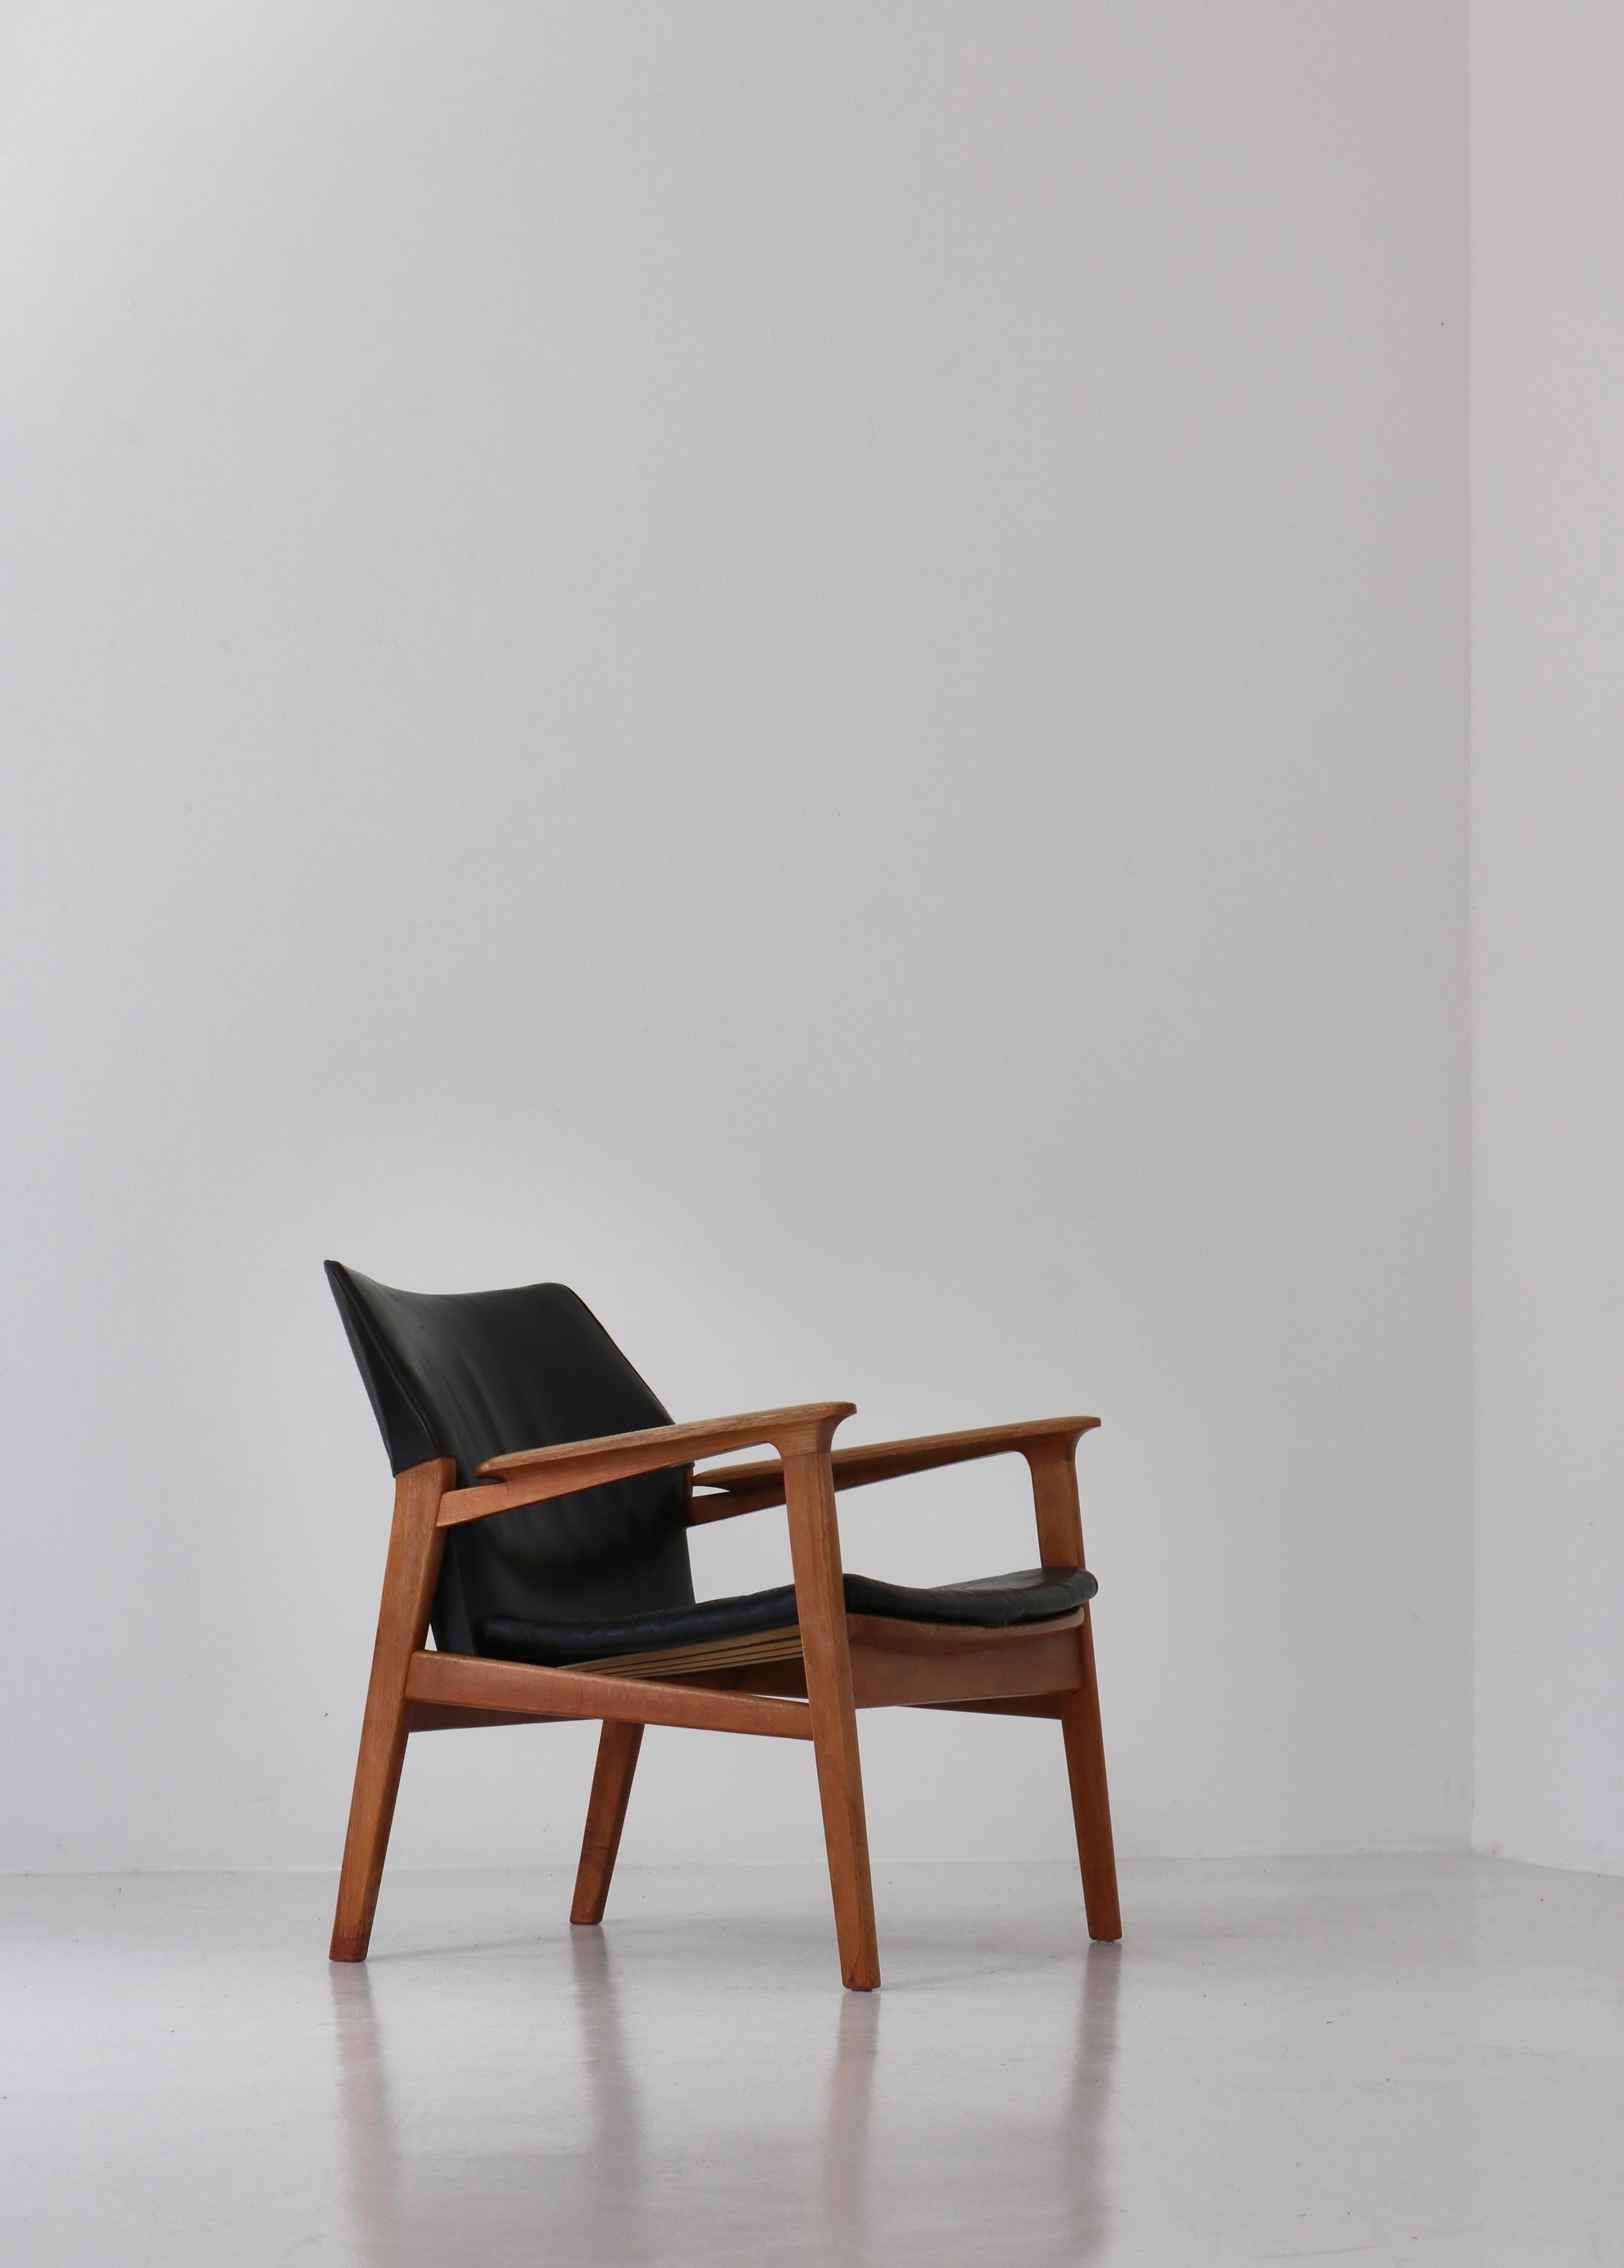 Danish Modern Lounge Chair in Patinated Oak & Black Leather by Hans Olsen, 1950s For Sale 4